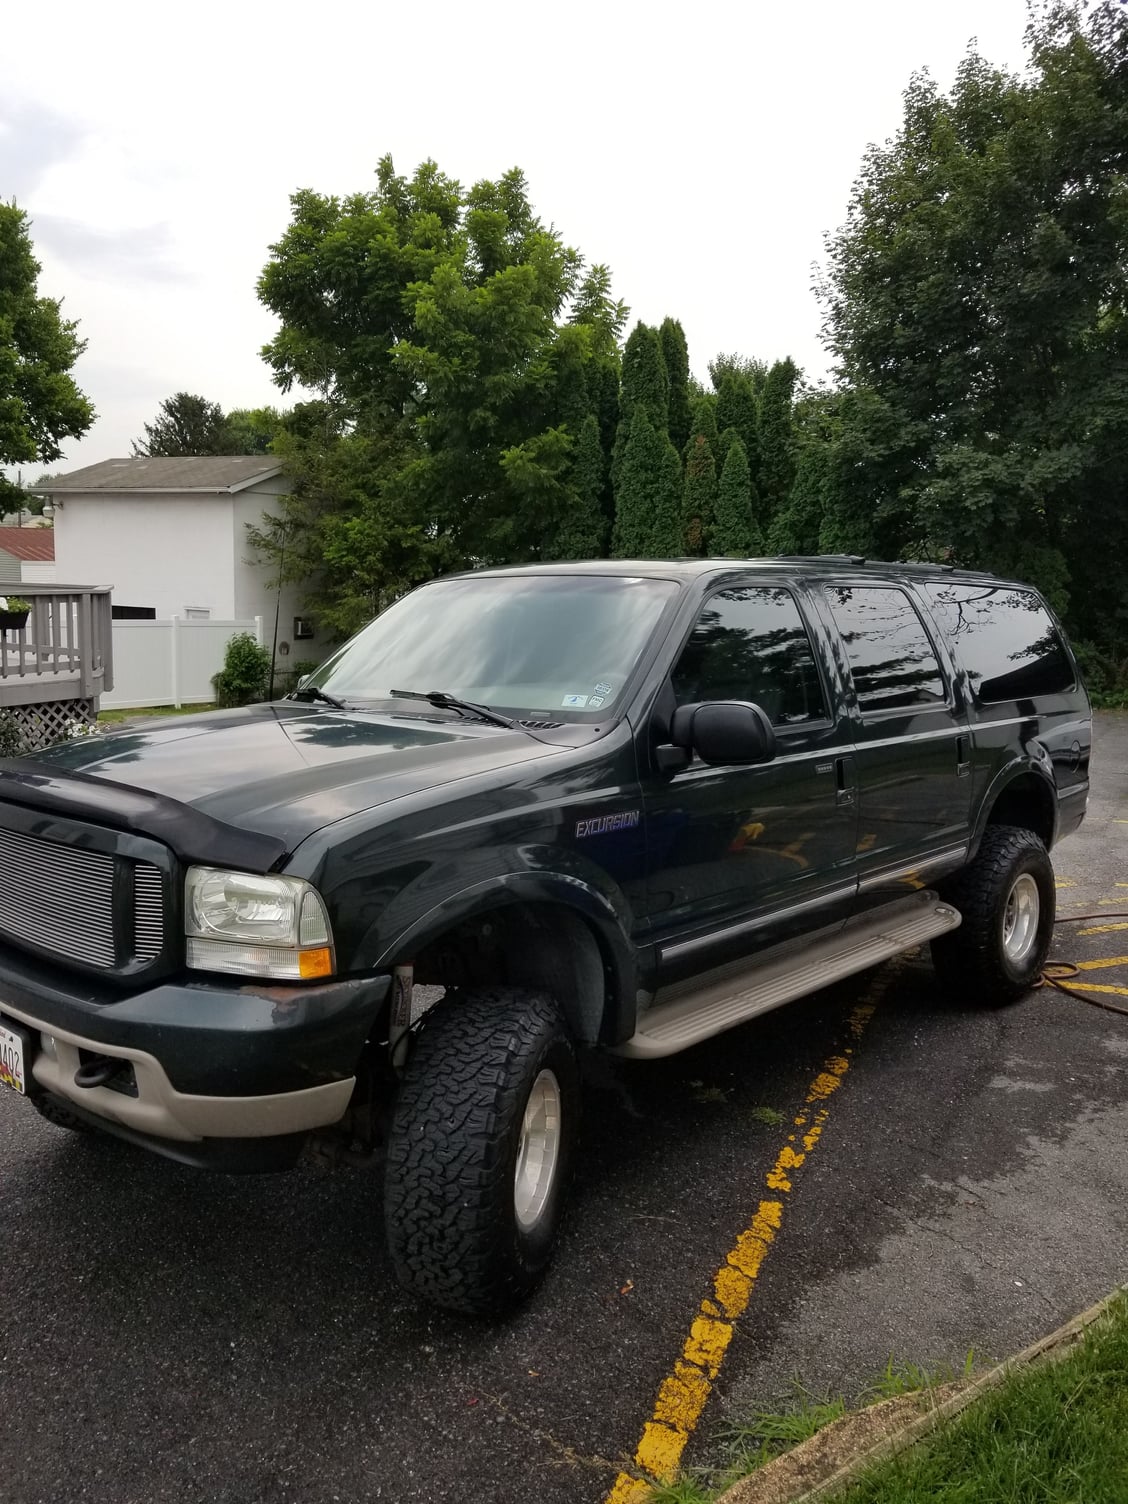 2003 Ford Excursion - 2003 Excursion Limited 4x4 V10 - Used - VIN 1FMNU43S93EB56118 - 207,000 Miles - 10 cyl - 4WD - Automatic - SUV - Other - Frederick, MD 21701, United States